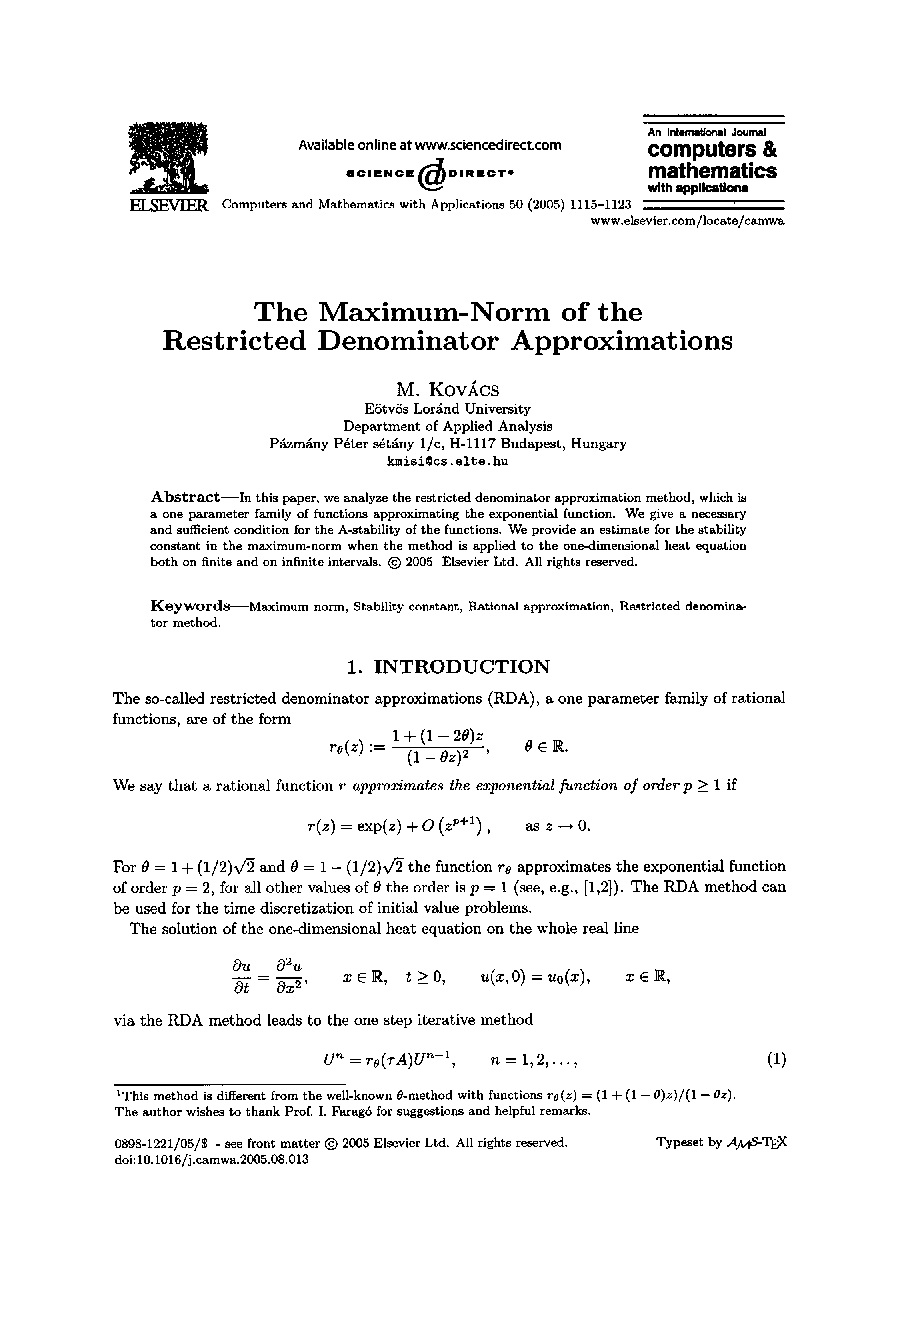 The maximum-norm of therestricted denominator approximations